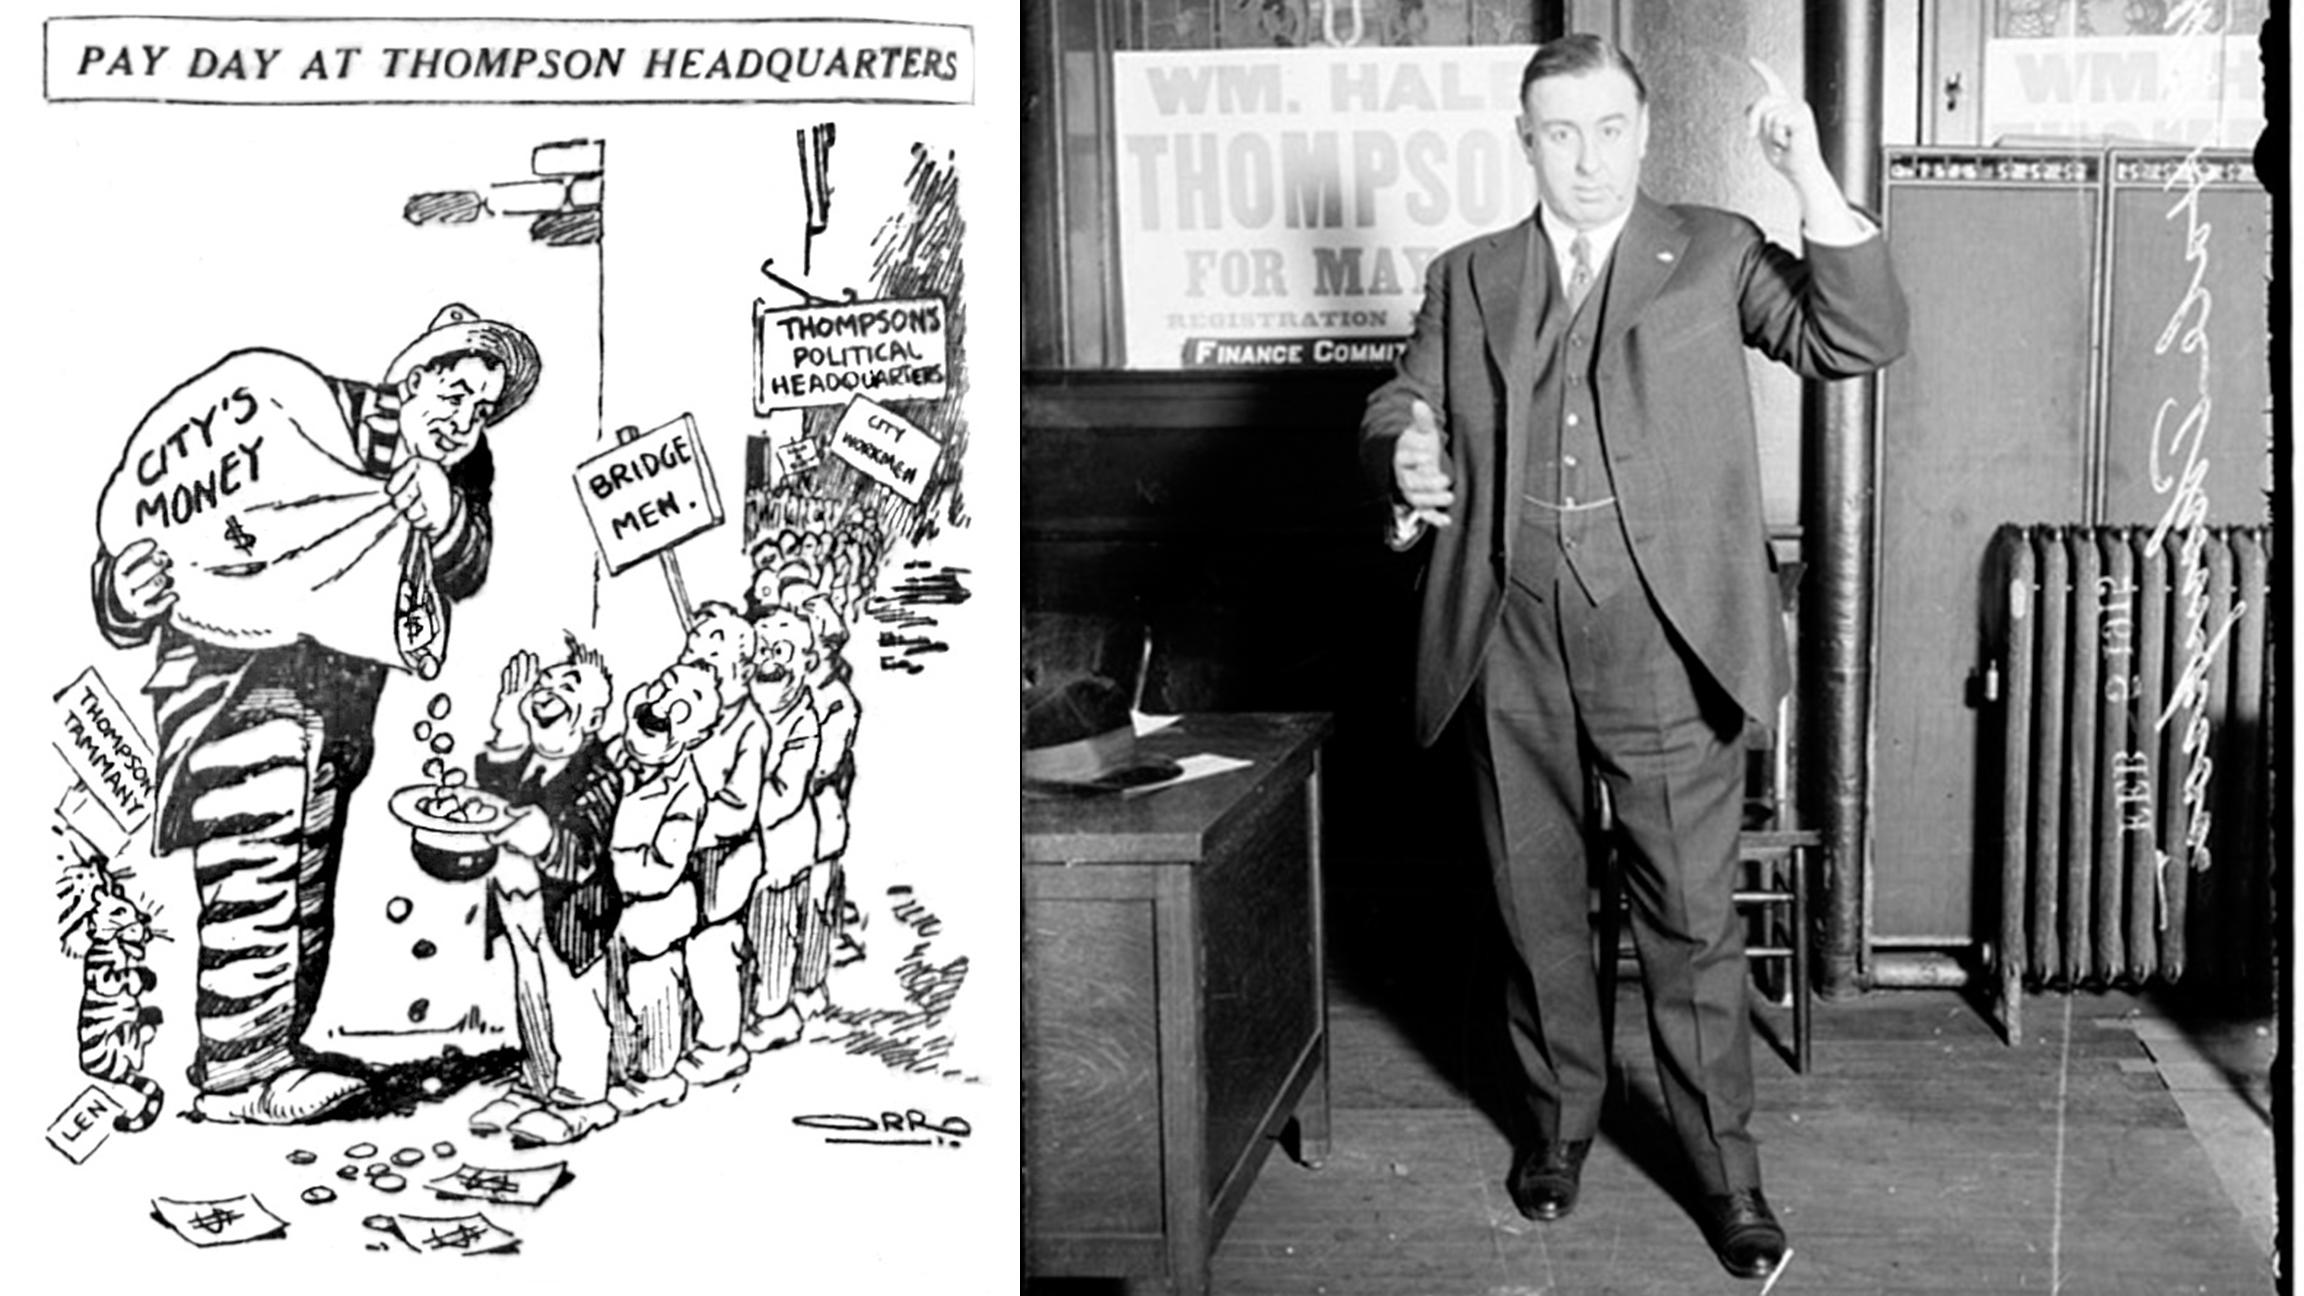 A 1920 political cartoon by David Orro (left) lampoons Chicago Mayor William Hale Thompson (right).